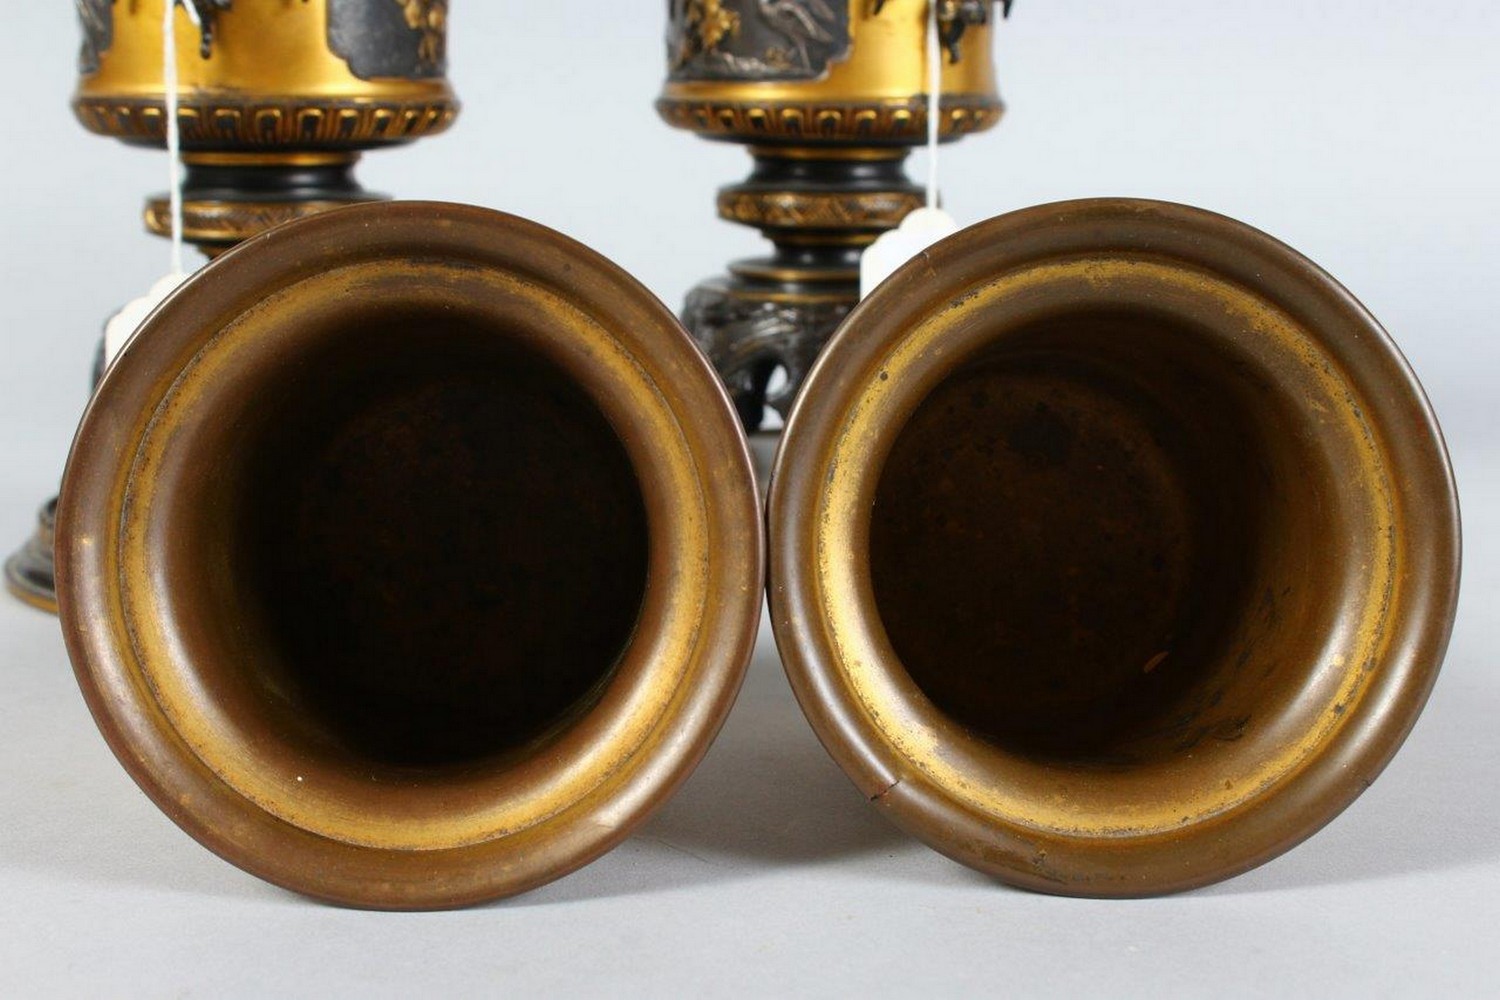 A GOOD PAIR OF EARLY 20TH CENTURY BARBEDIENNE & JAPANESE STYLE AESTHETIC MIXED METAL VASES, each - Image 10 of 10